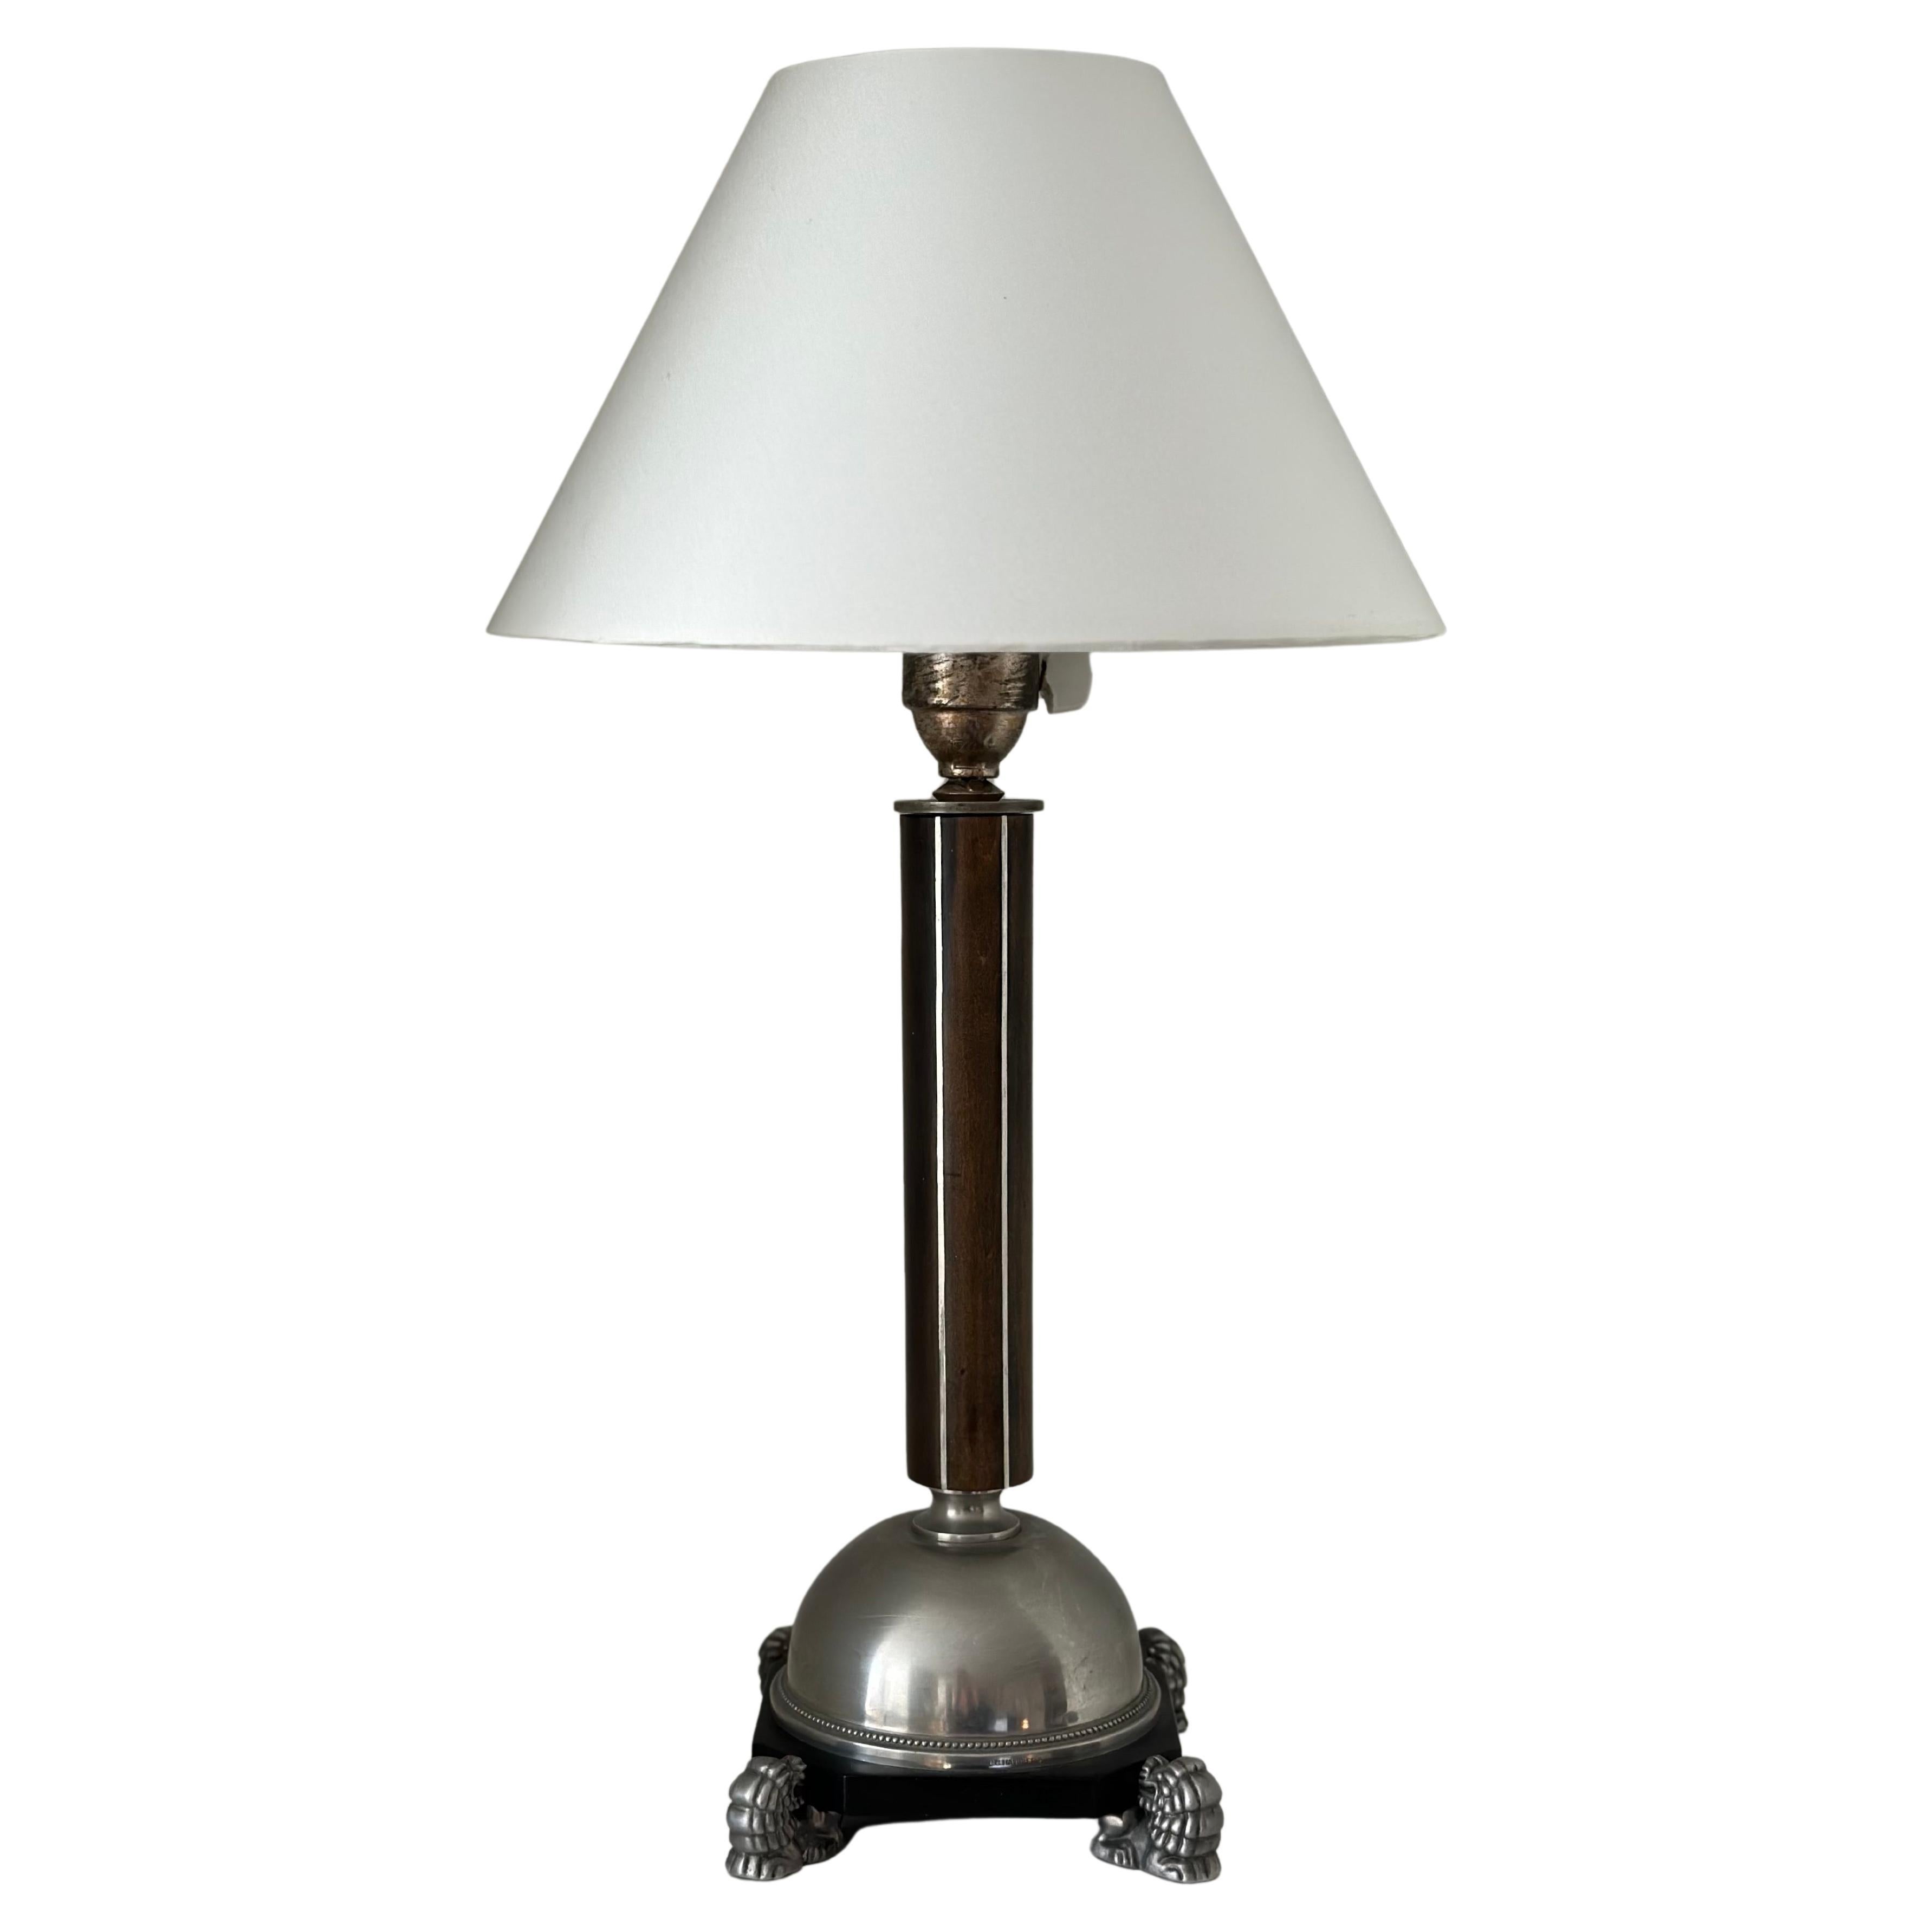 Swedish Grace Pewter Table Lamp Likely by Anna Petrus, C.G. Hallberg, 1930s